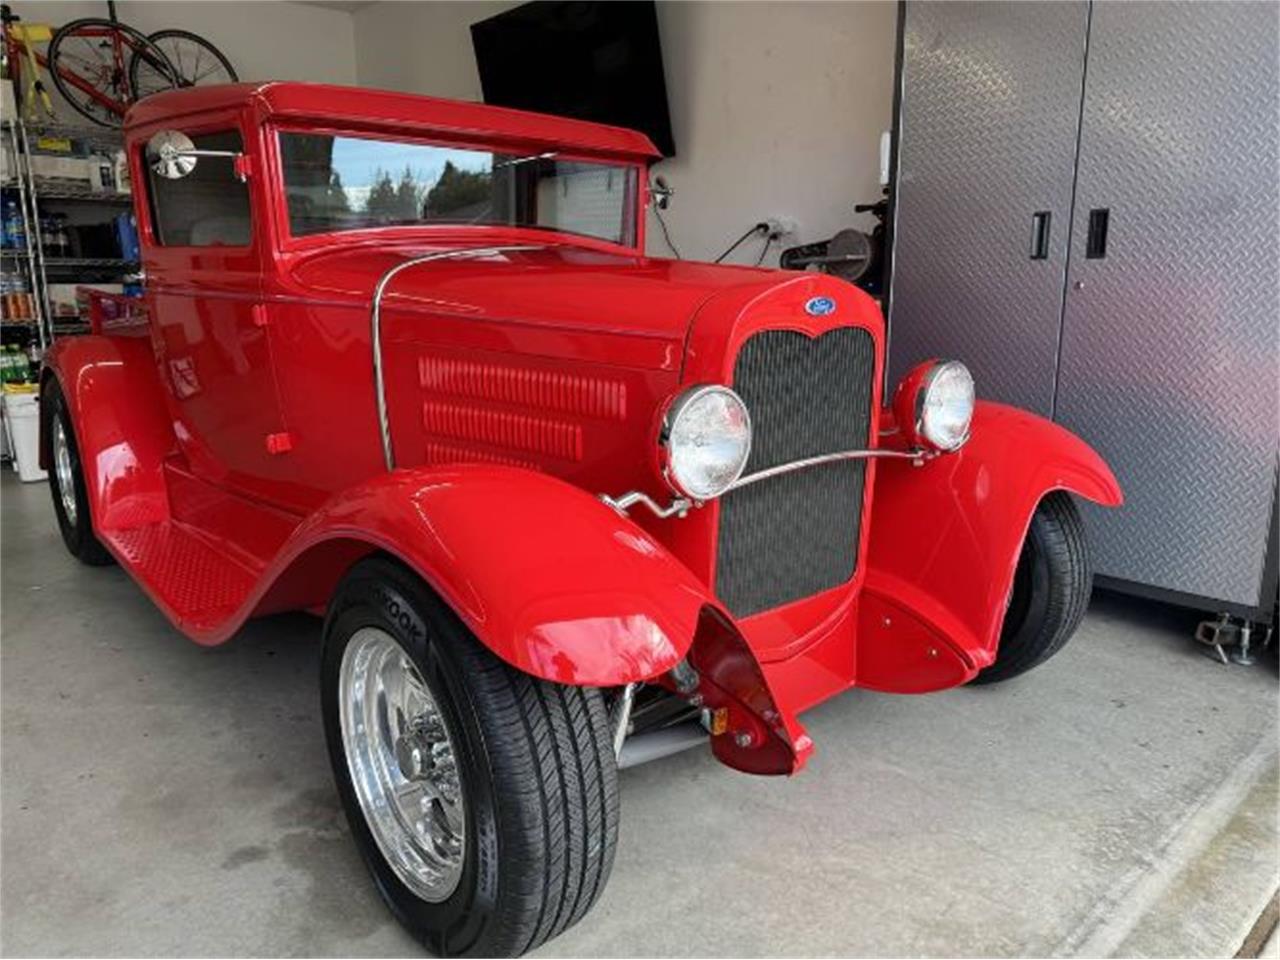 For Sale: 1931 Ford Model A in Cadillac, Michigan for sale in Cadillac, MI